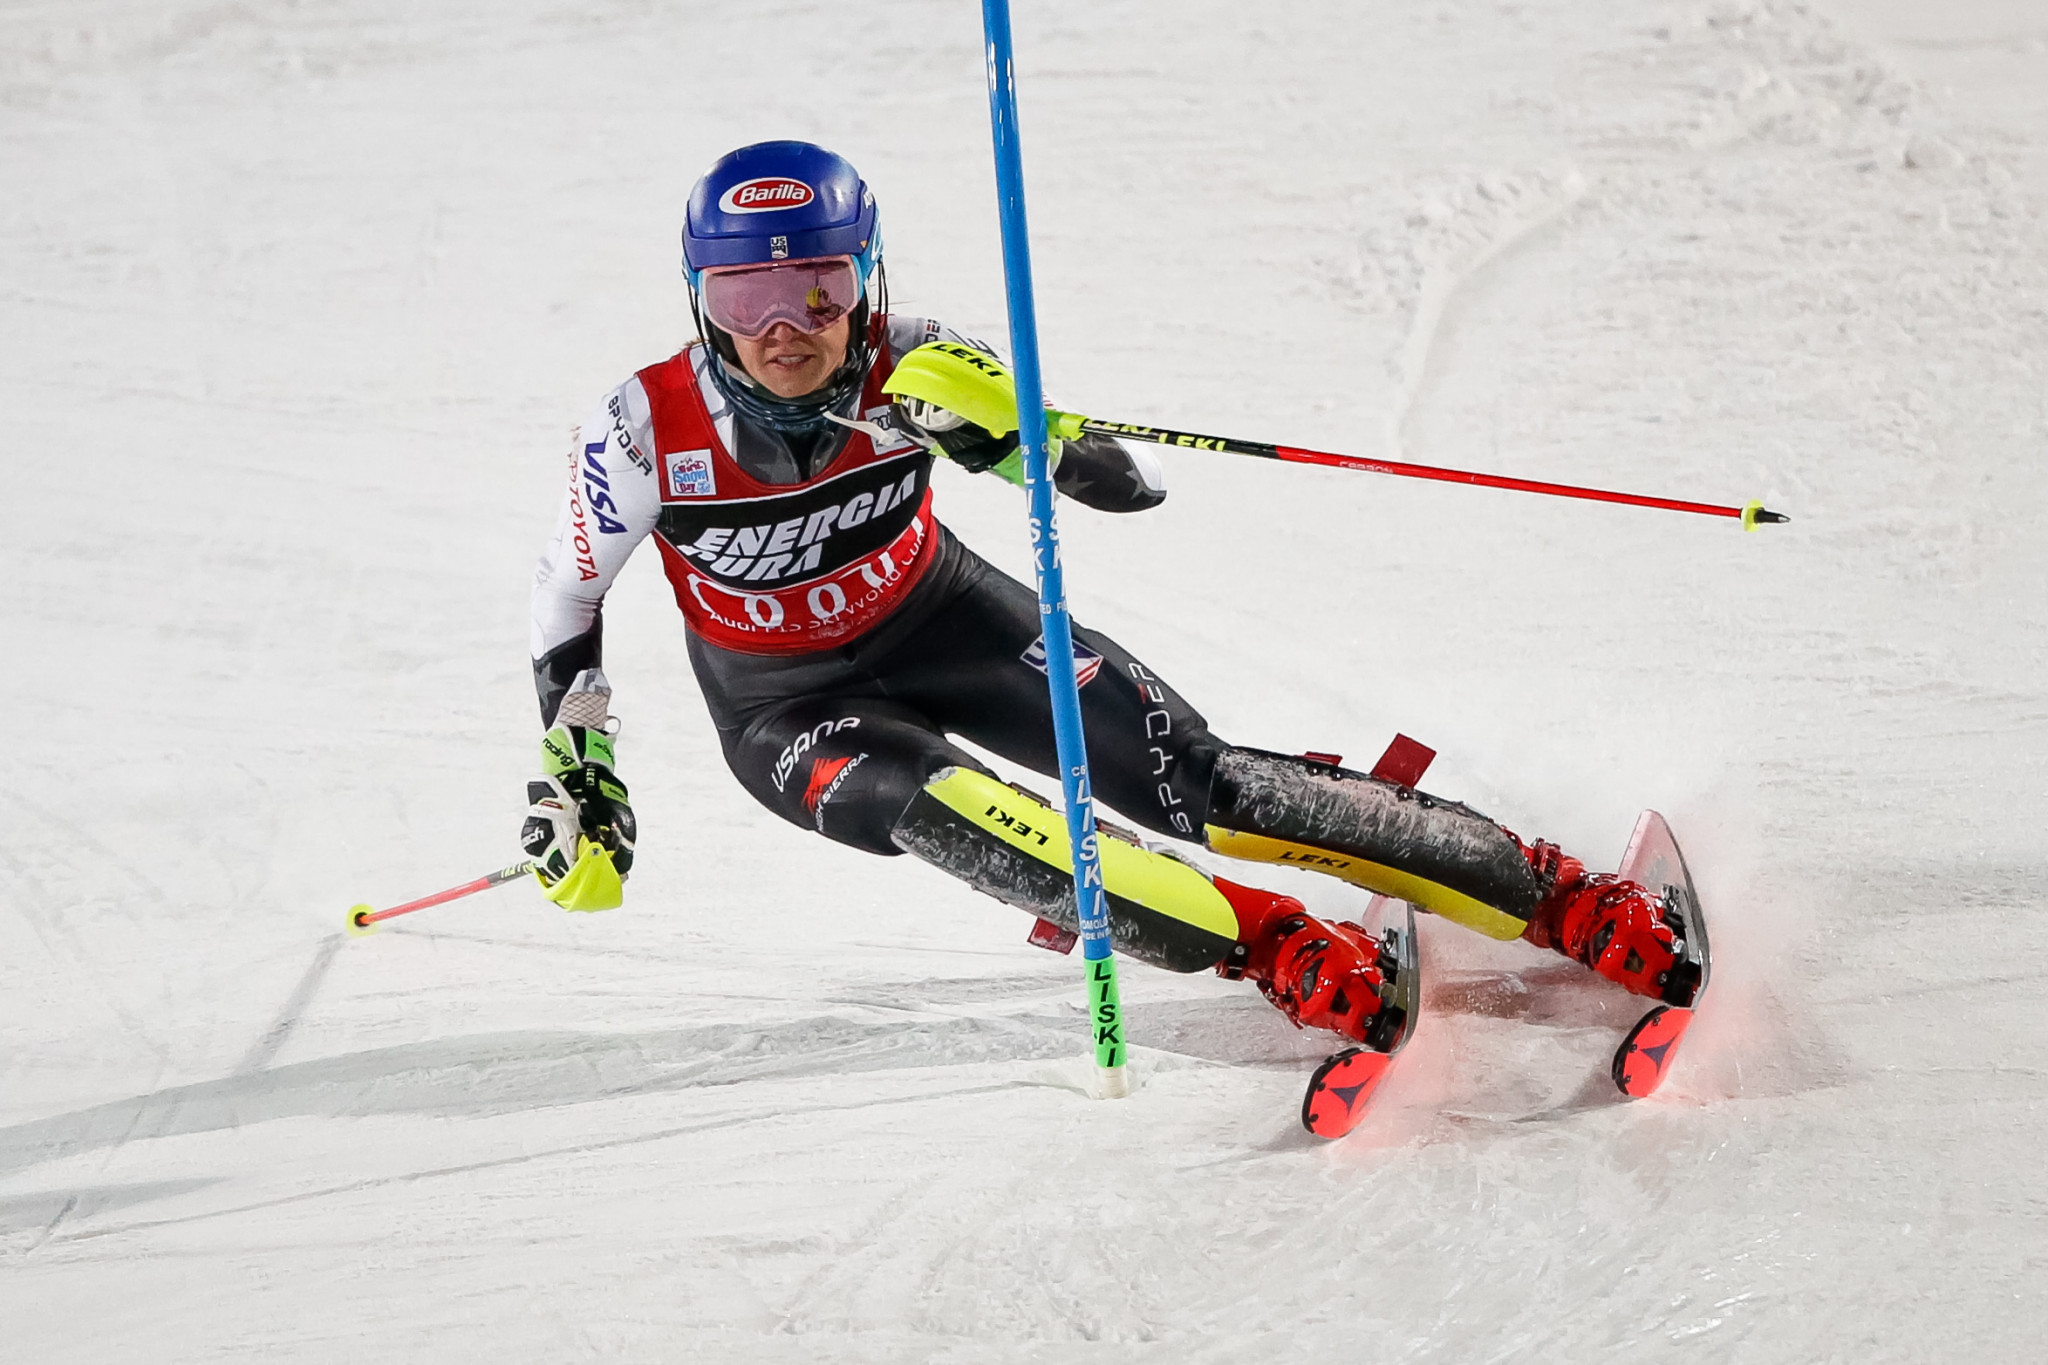 Mikaela Shiffrin extended her overall World Cup lead with a dominant performance ©Getty Images